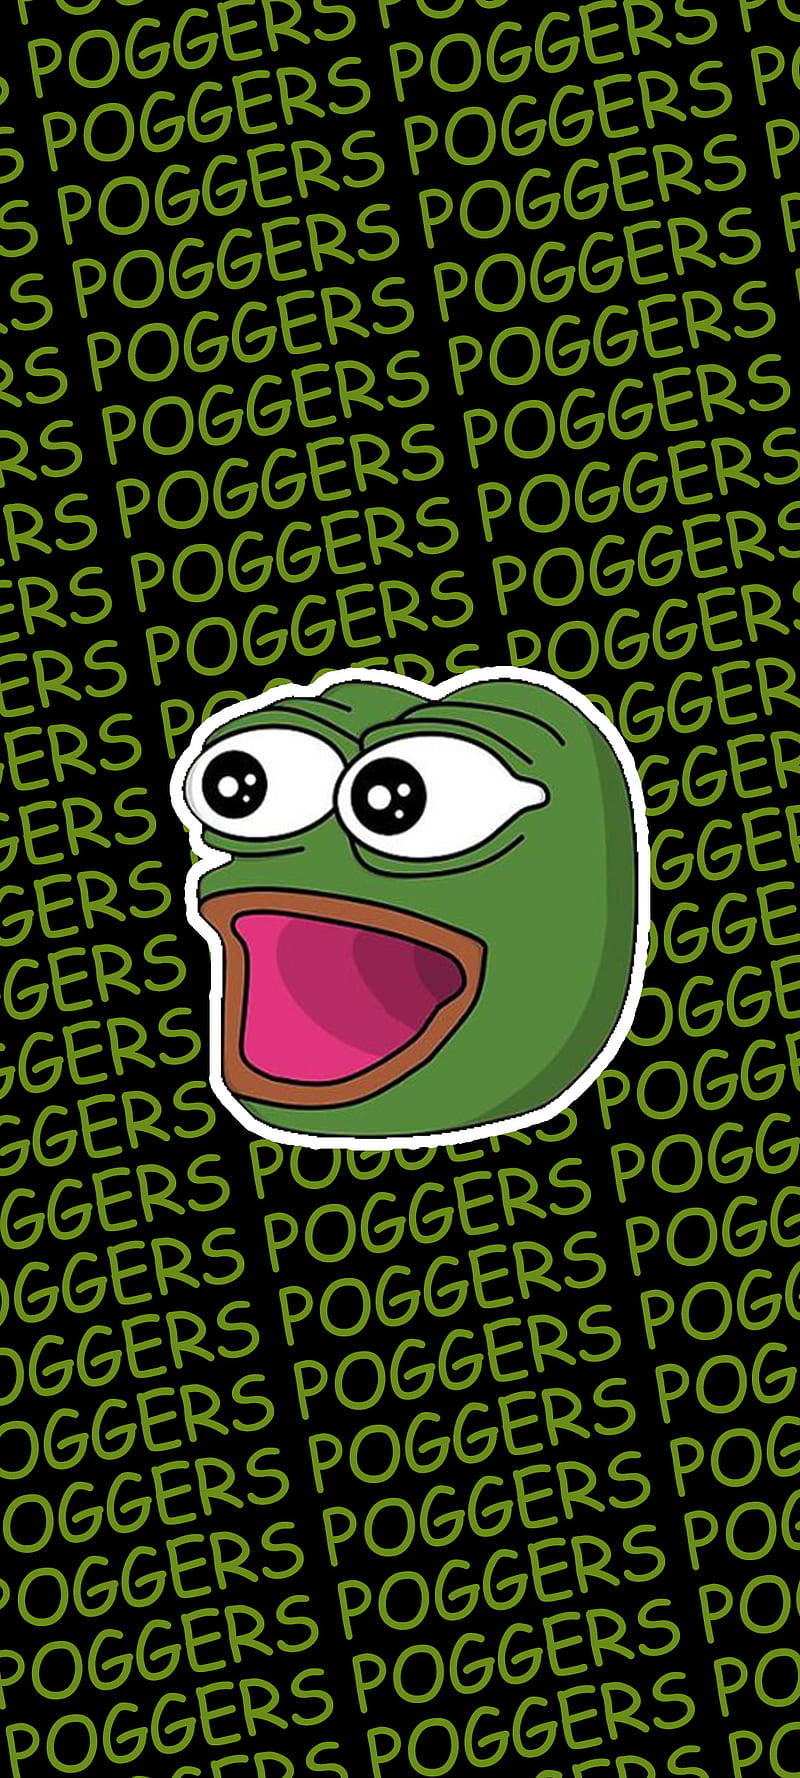 Pepe The Frog Poggers Wallpaper